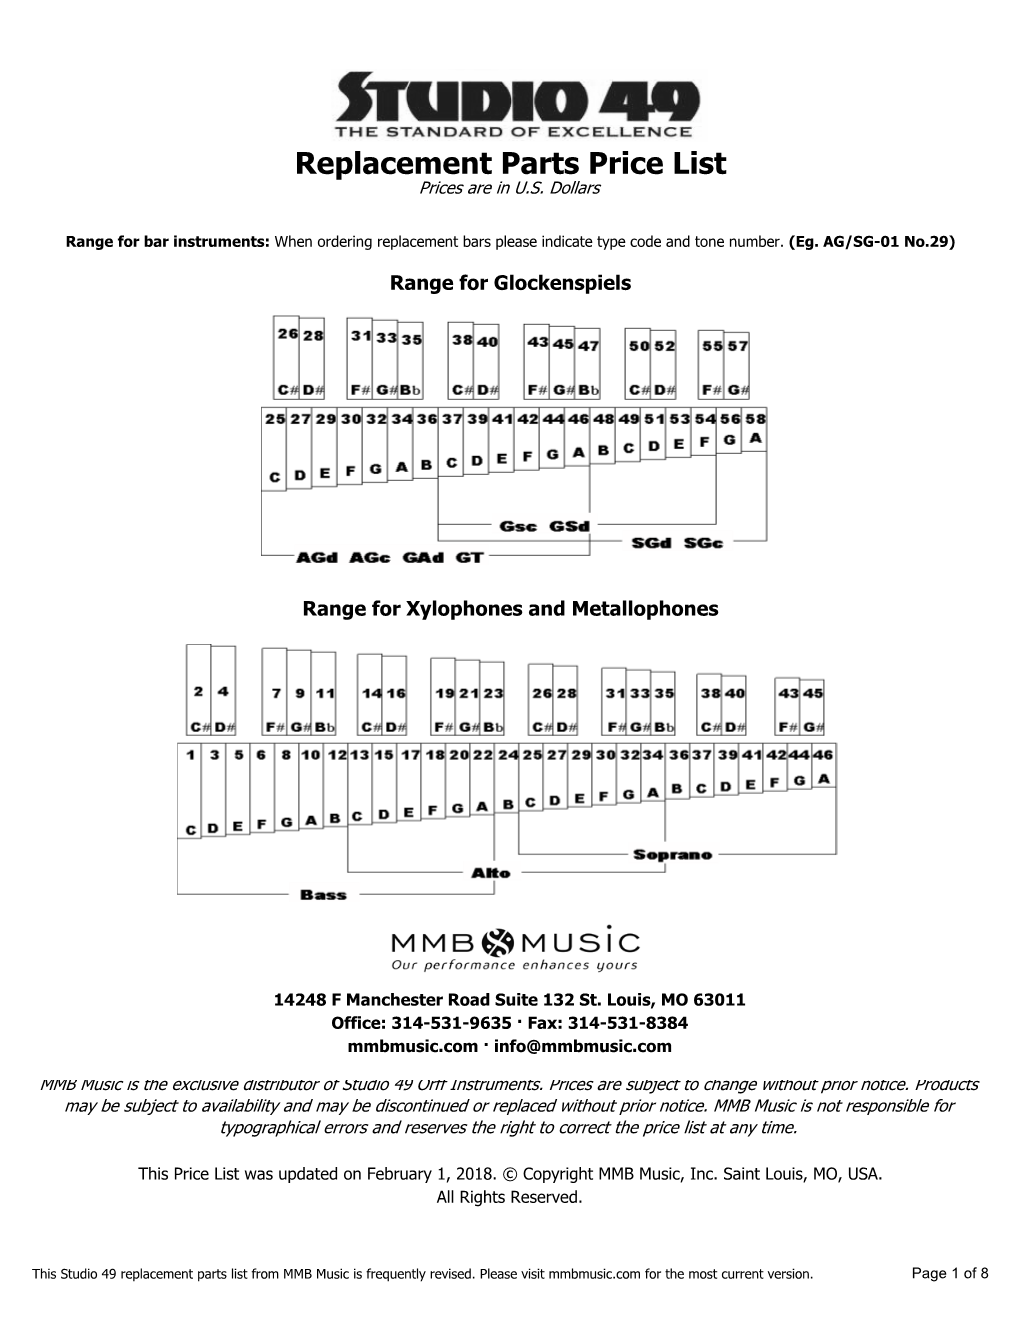 Replacement Parts Price List Prices Are in U.S